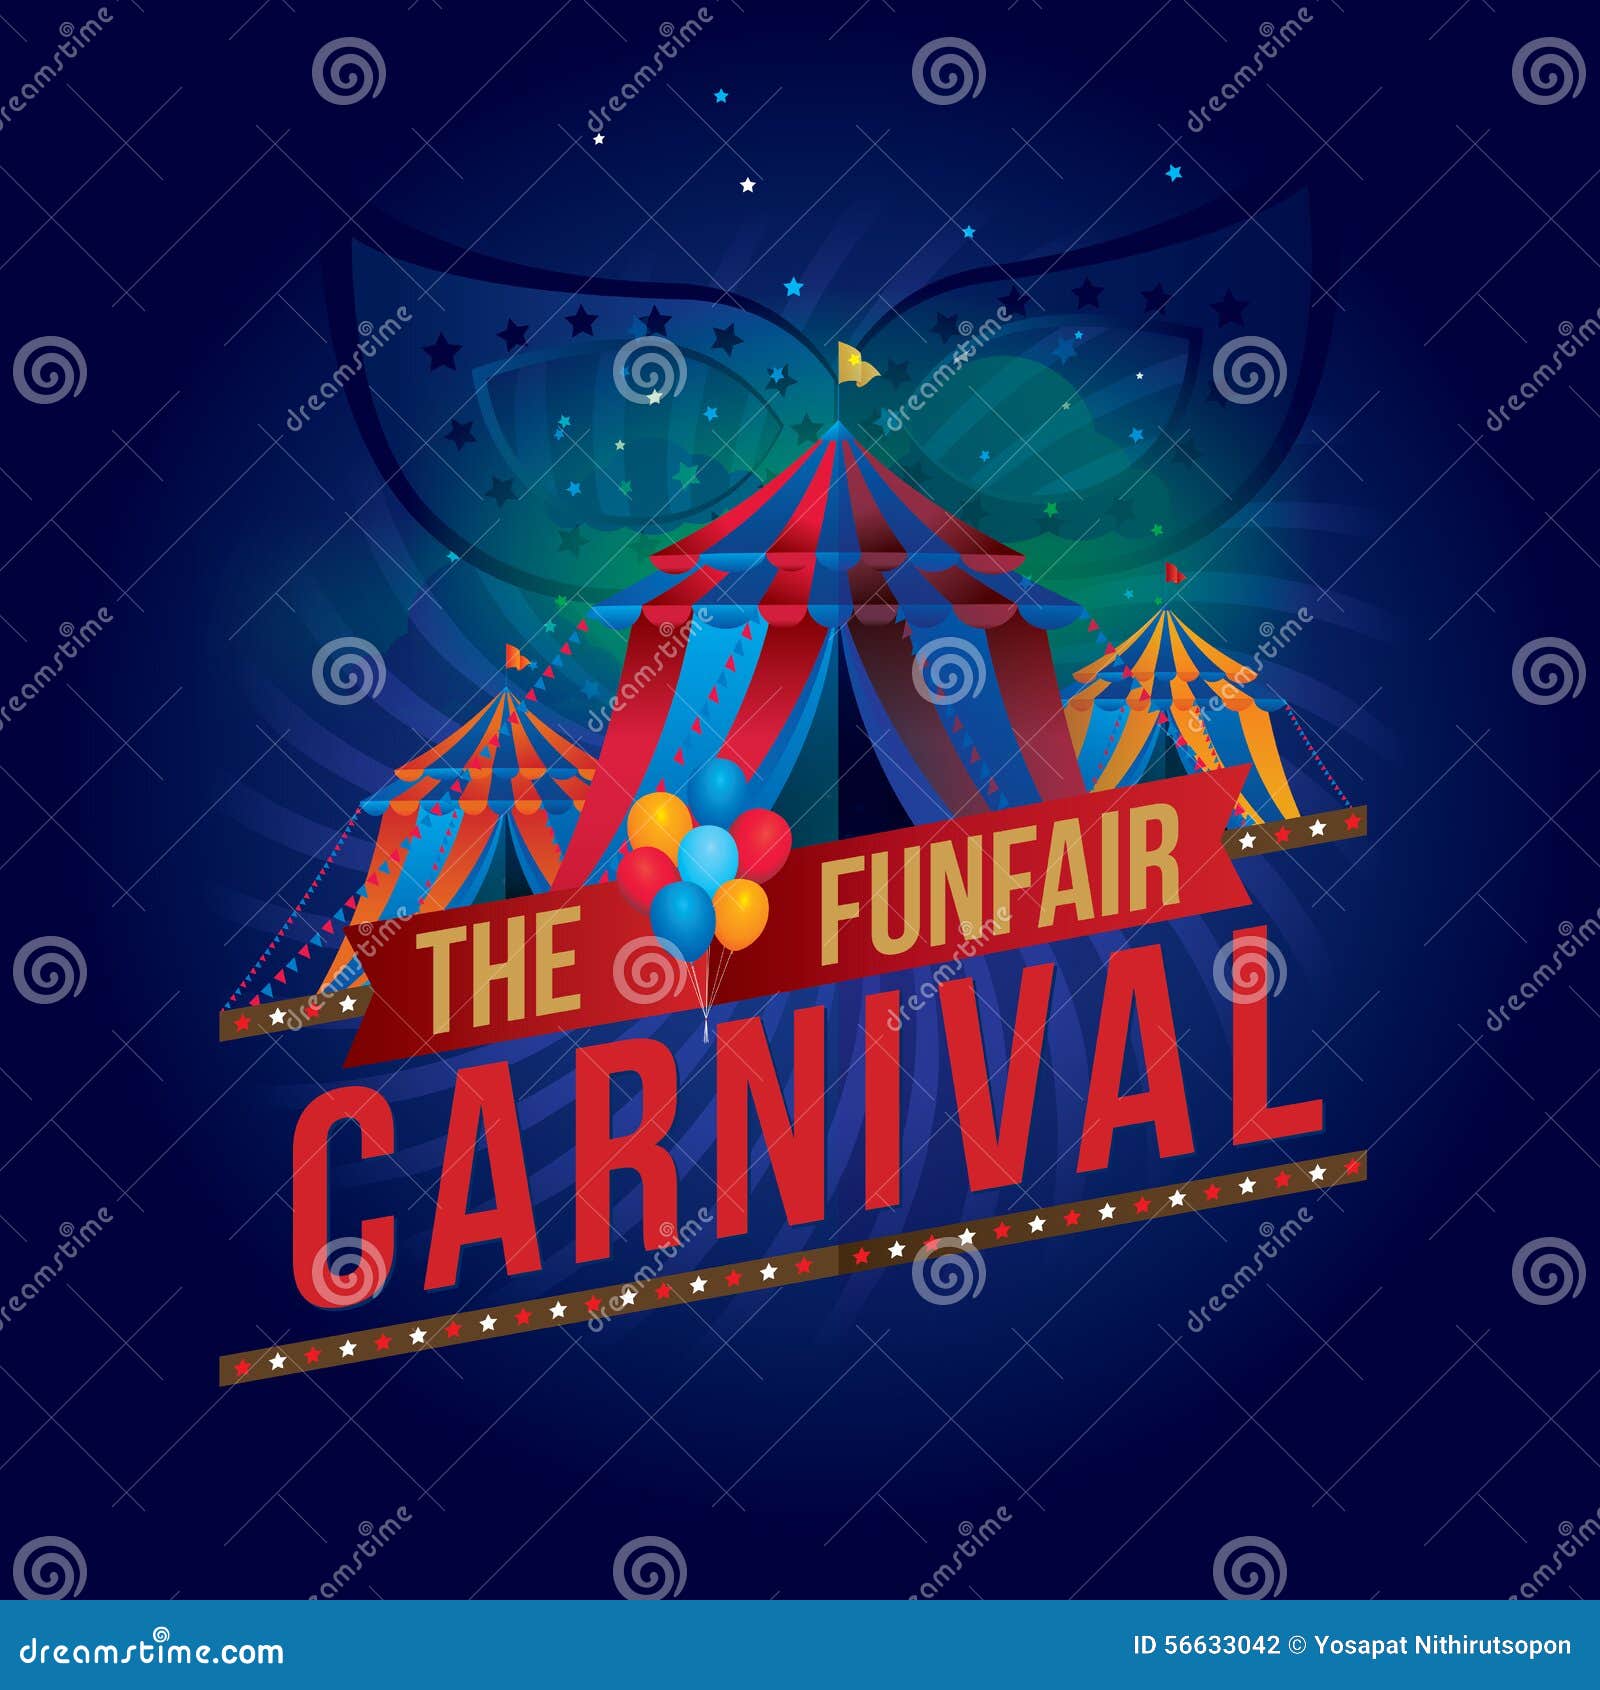 the carnival funfair and magic show